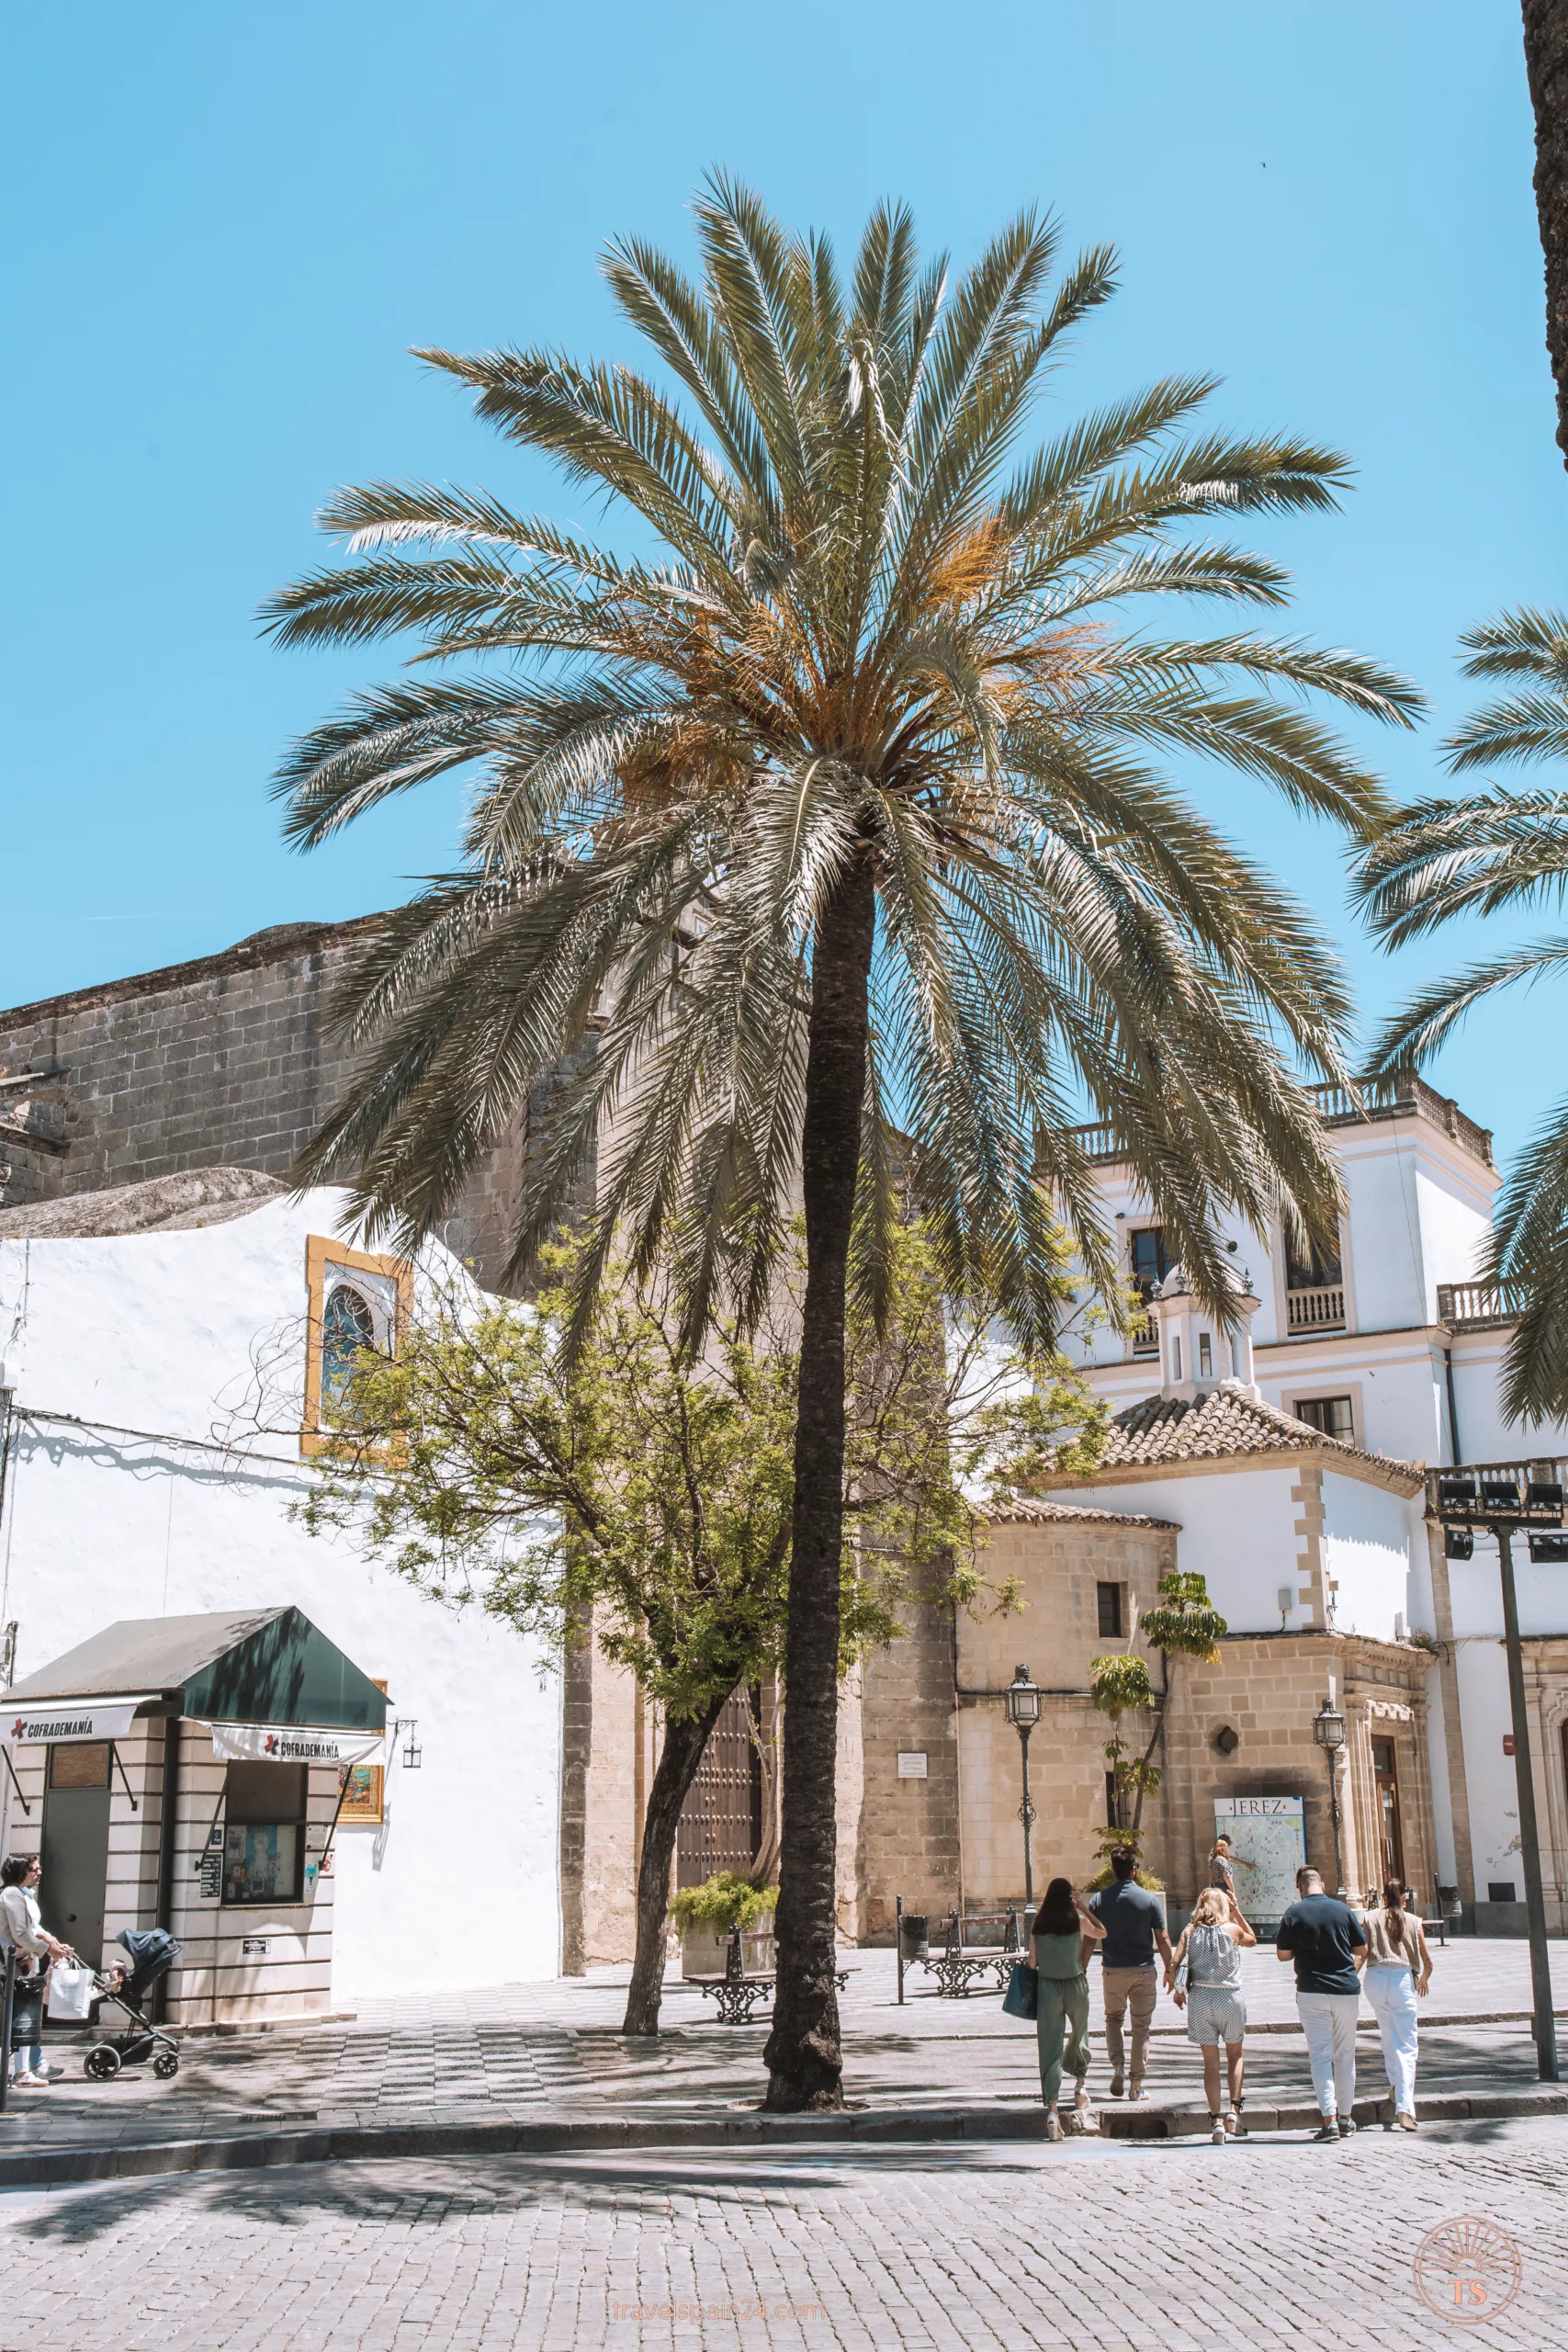 Street view from the monastery in Jerez de la Frontera, showing a palm tree in front of the facade and people passing by. This image captures the peaceful surroundings of the monastery